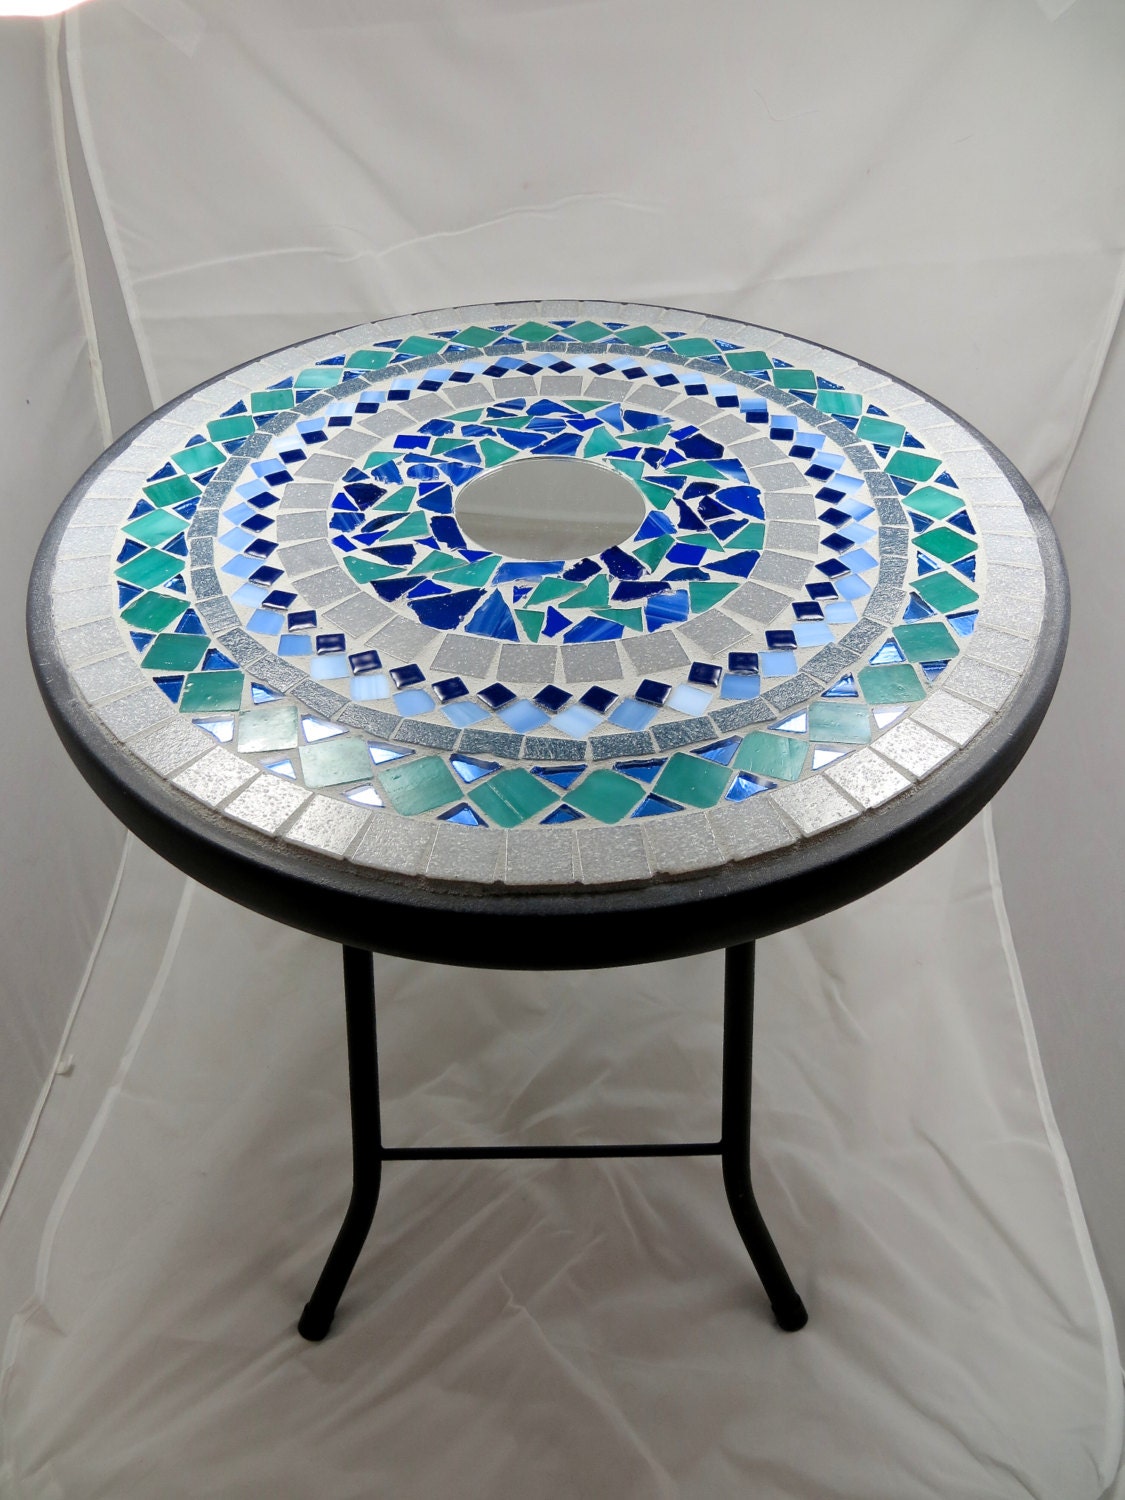 Round Mosaic Outdoor Coffee Table : Moroccan Round Mosaic Outdoor Tile ...